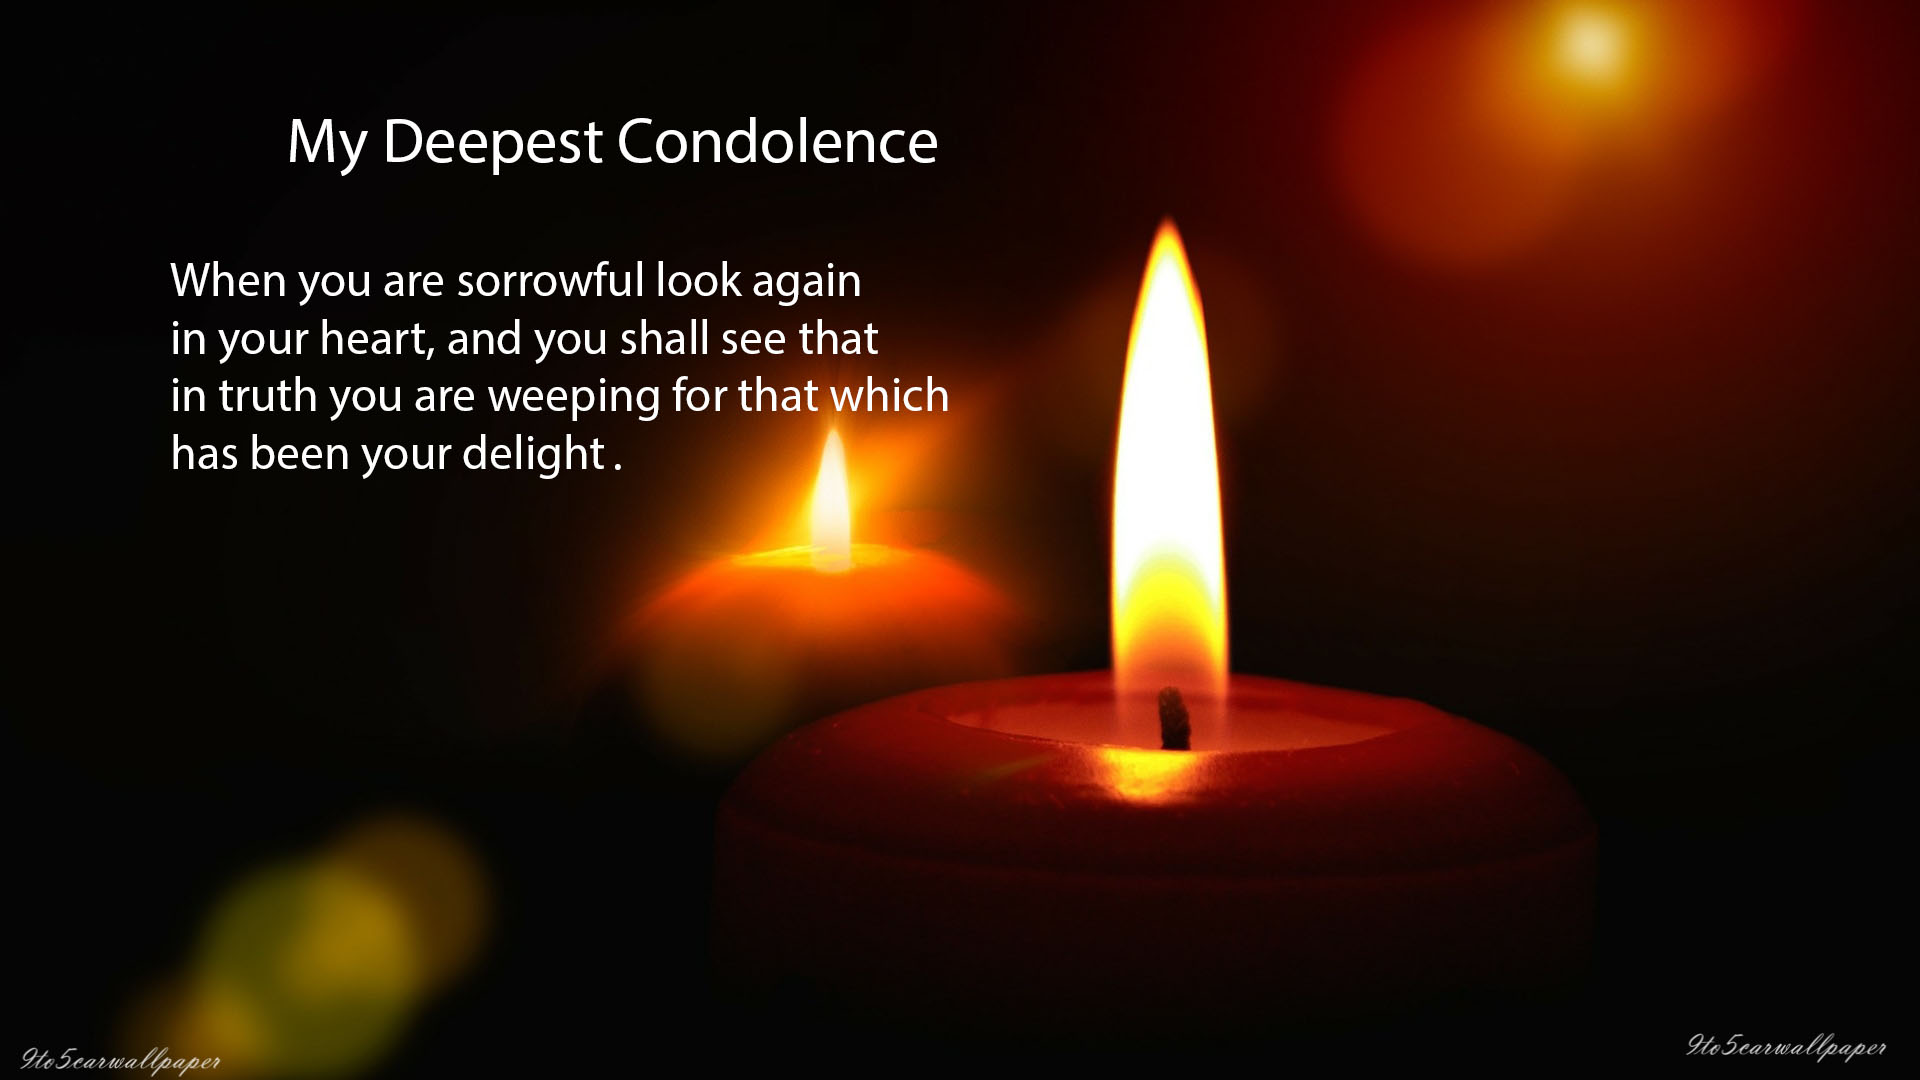 Condolence Sad Quotes Images And Wallpapers 9to5 Car Wallpapers